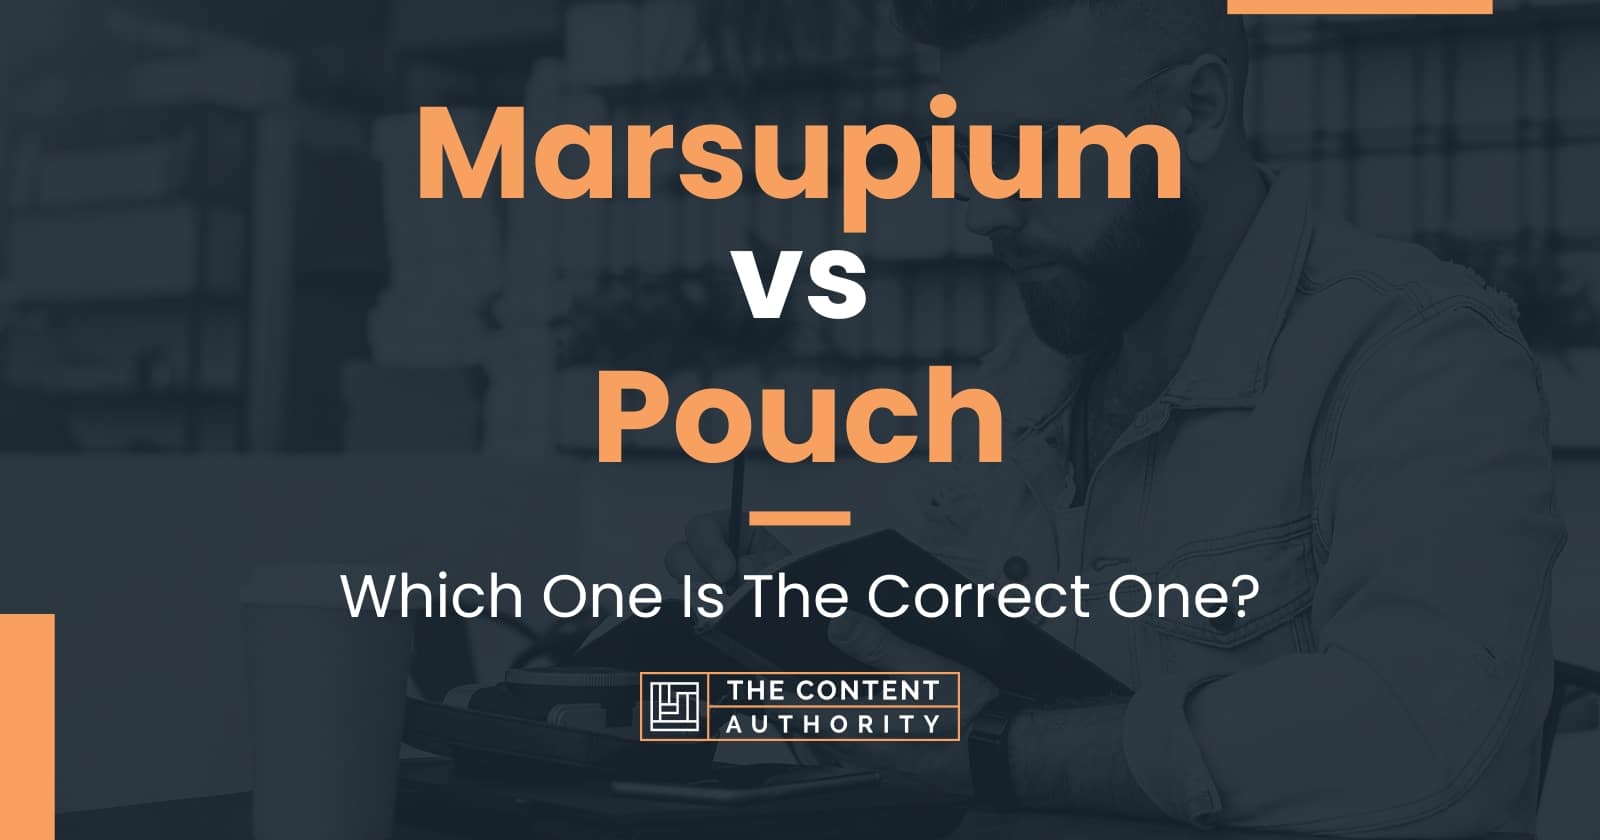 Marsupium vs Pouch: Which One Is The Correct One?